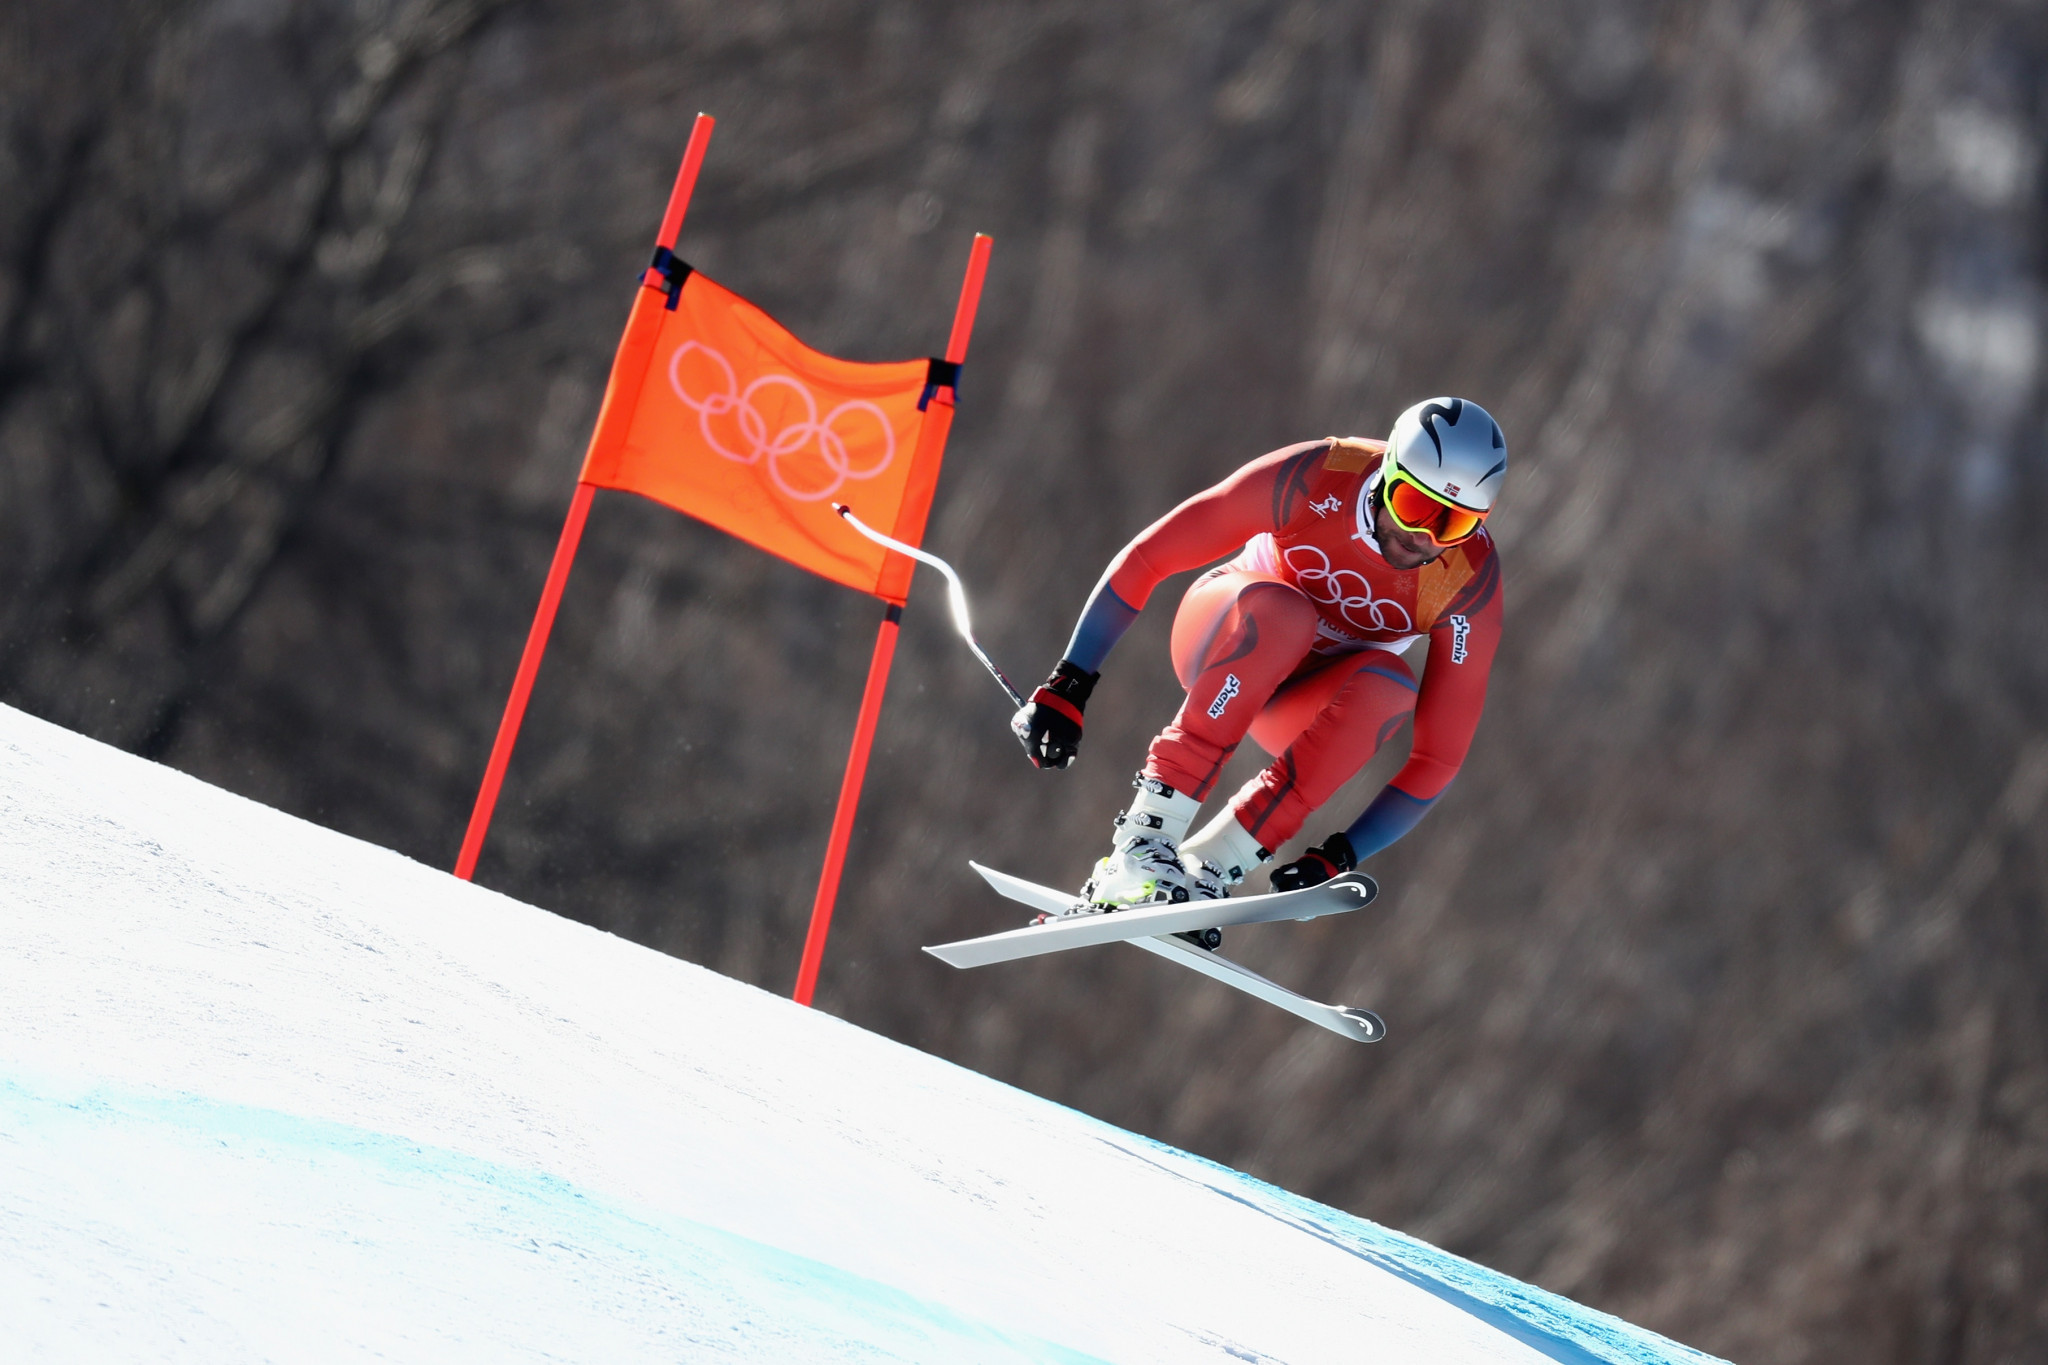 Svindal delivers display fit for royals to win Olympic men's downhill title at Pyeongchang 2018